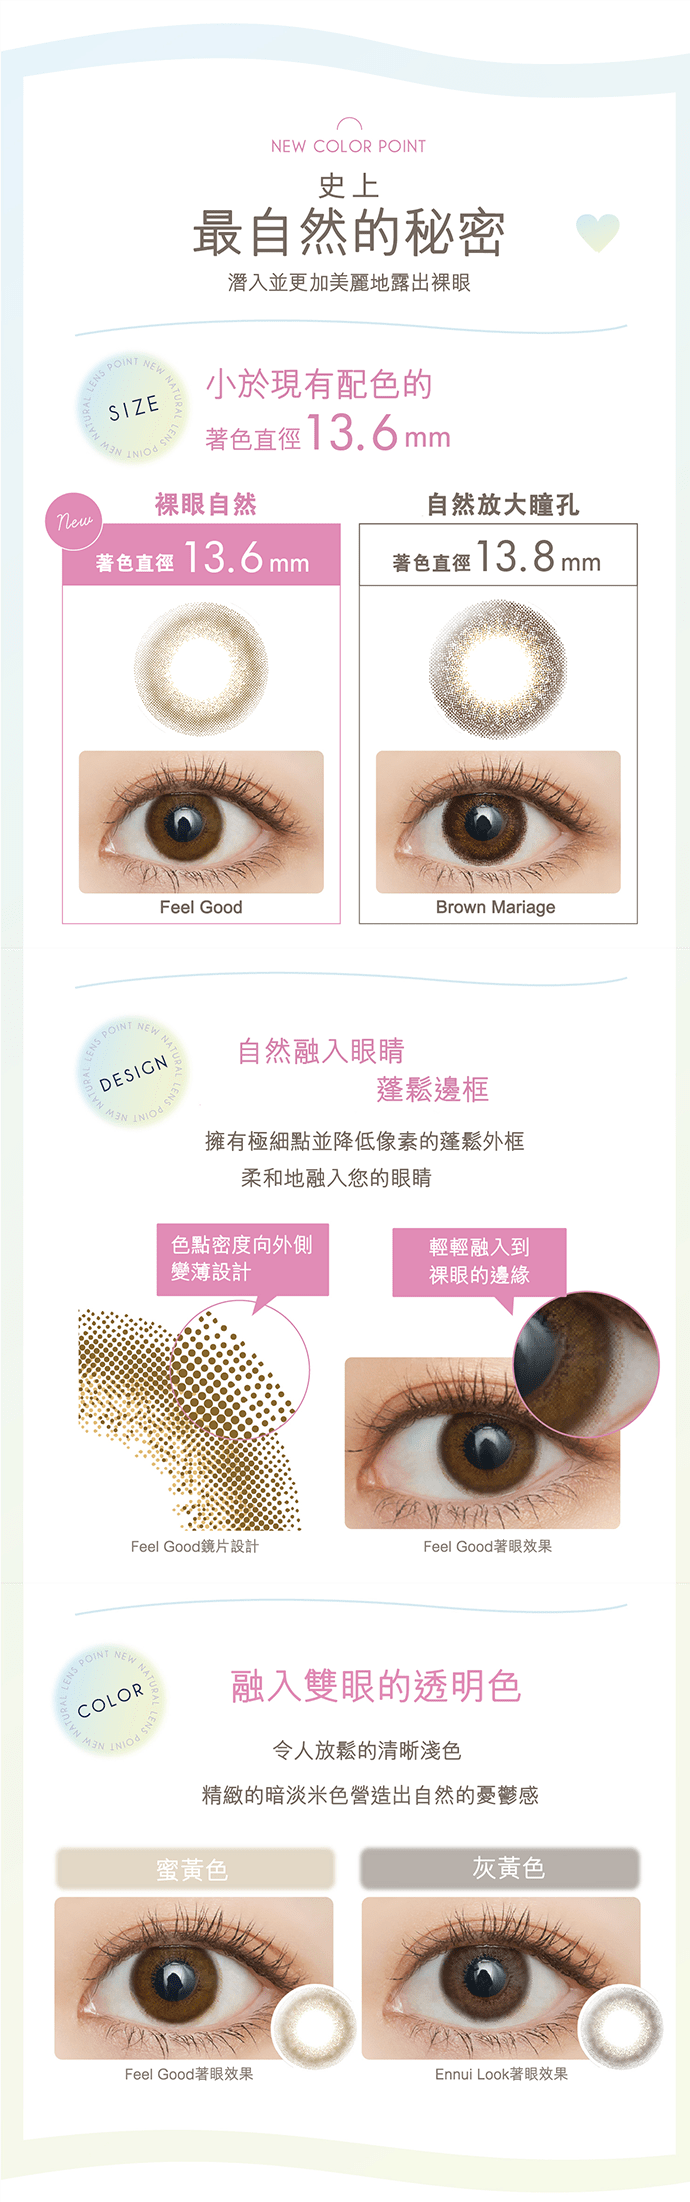 EverColor 1 Day Natural Moist Label Silhouette Duo 有色每日抛棄隱形眼鏡 (10片裝)